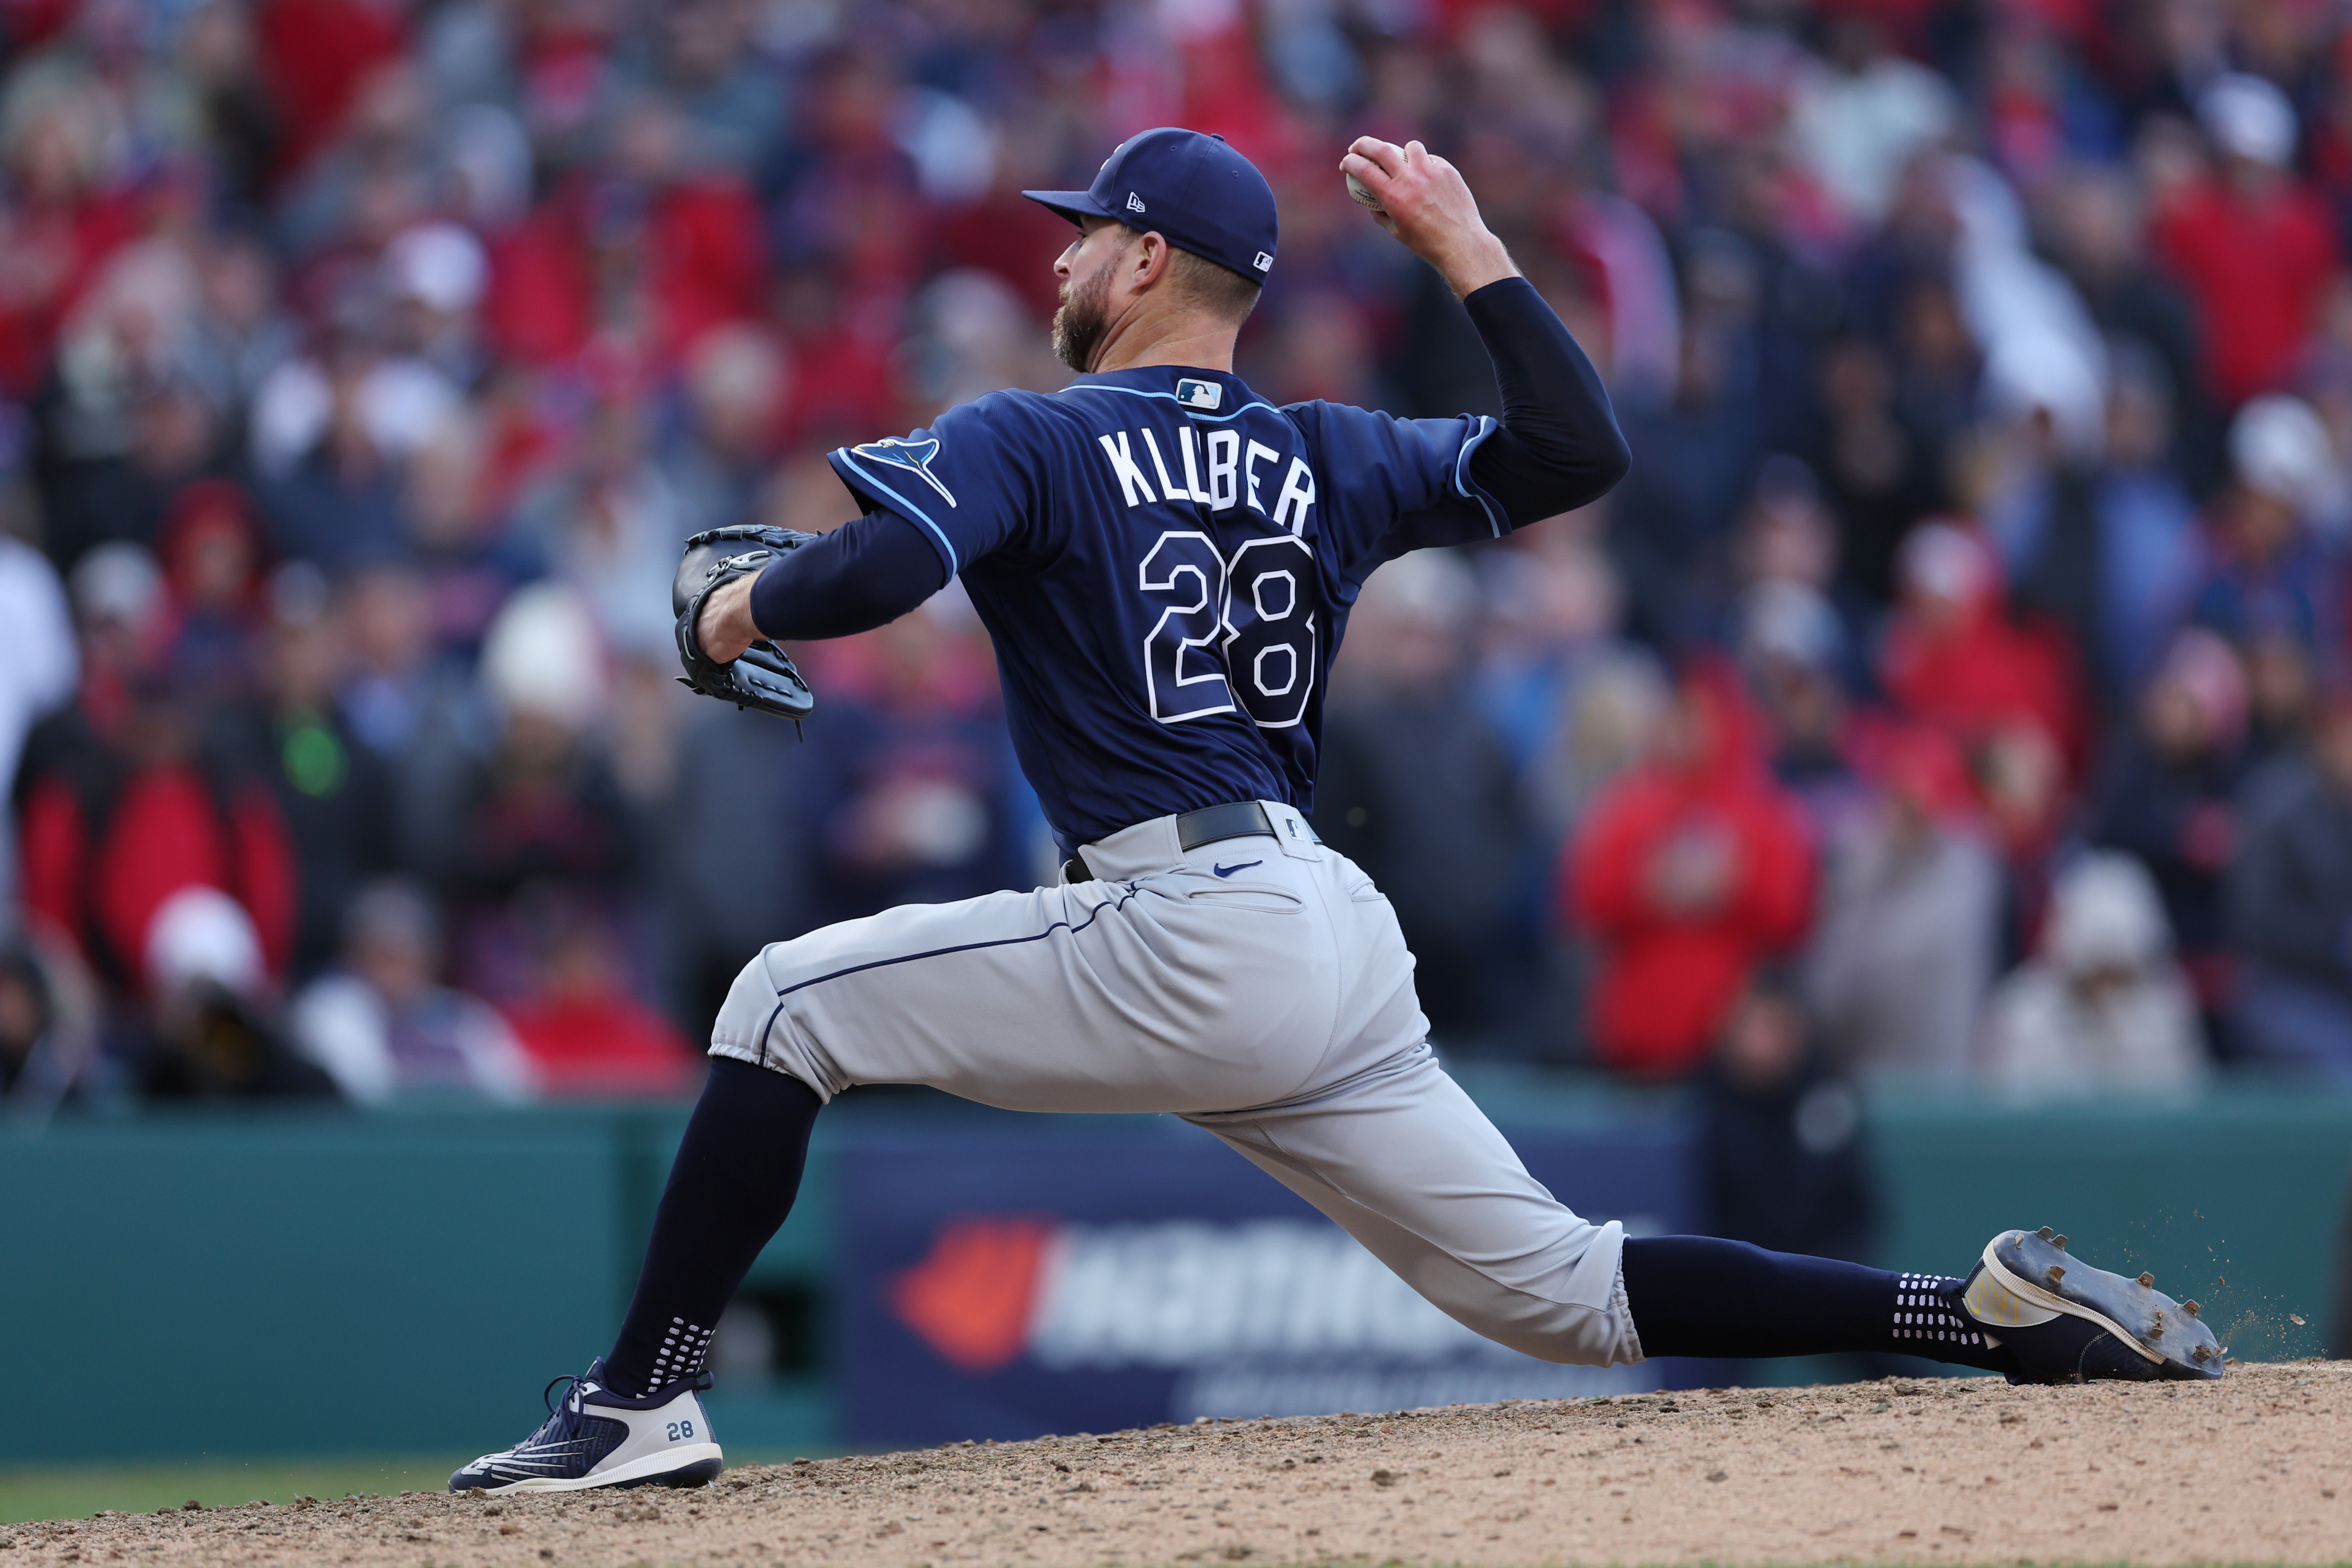 Corey Kluber and his girls — Private Editorial